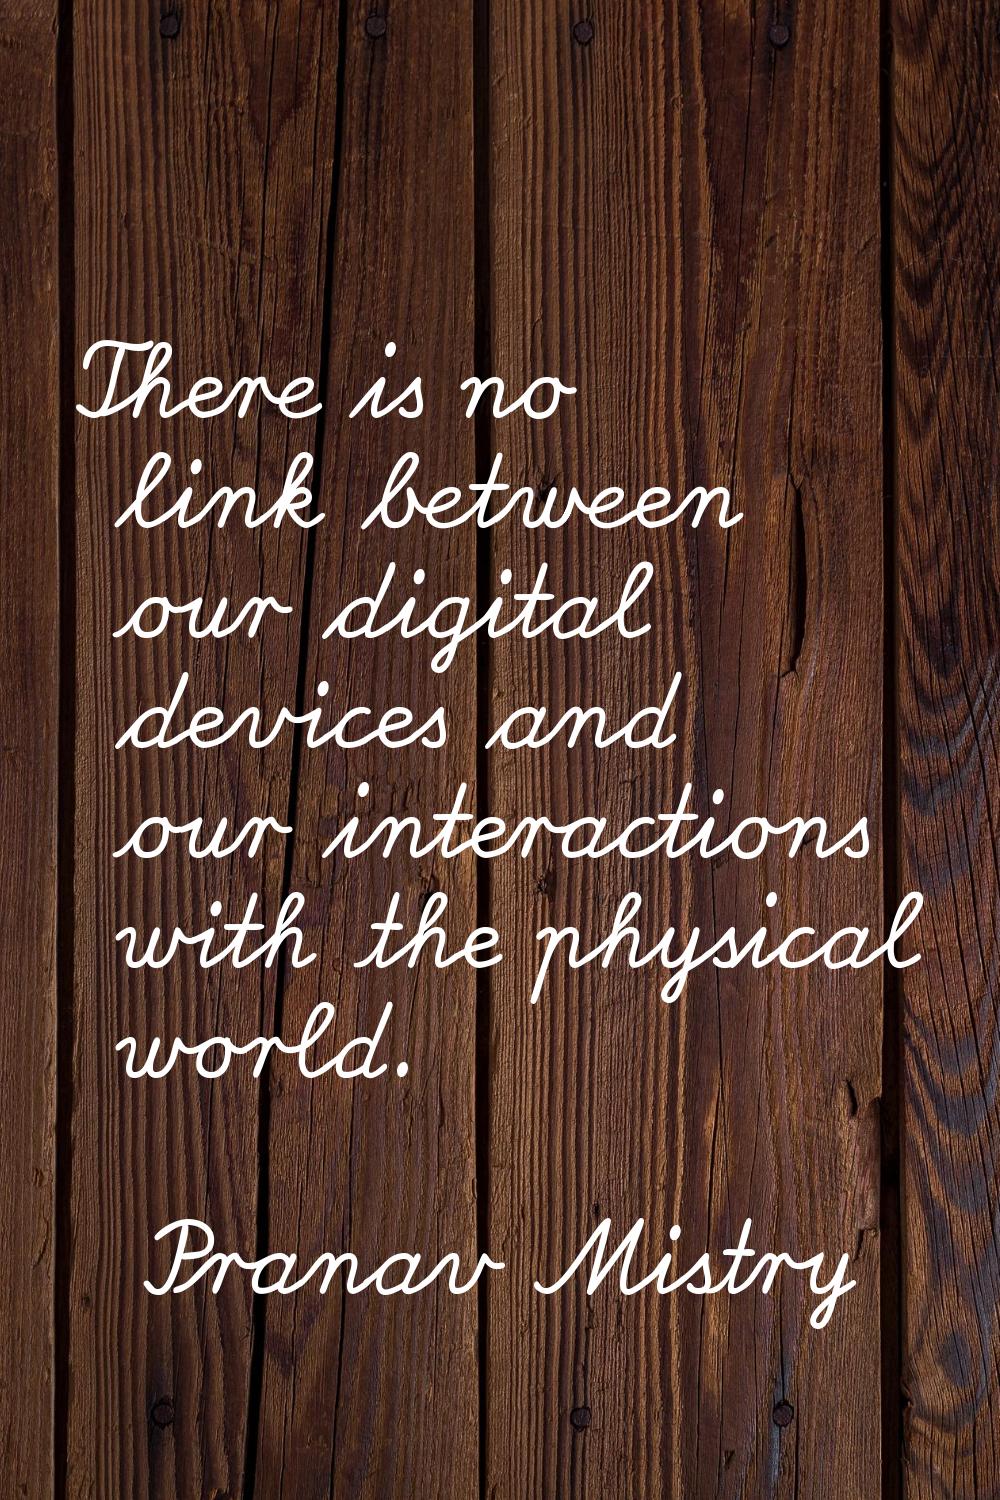 There is no link between our digital devices and our interactions with the physical world.